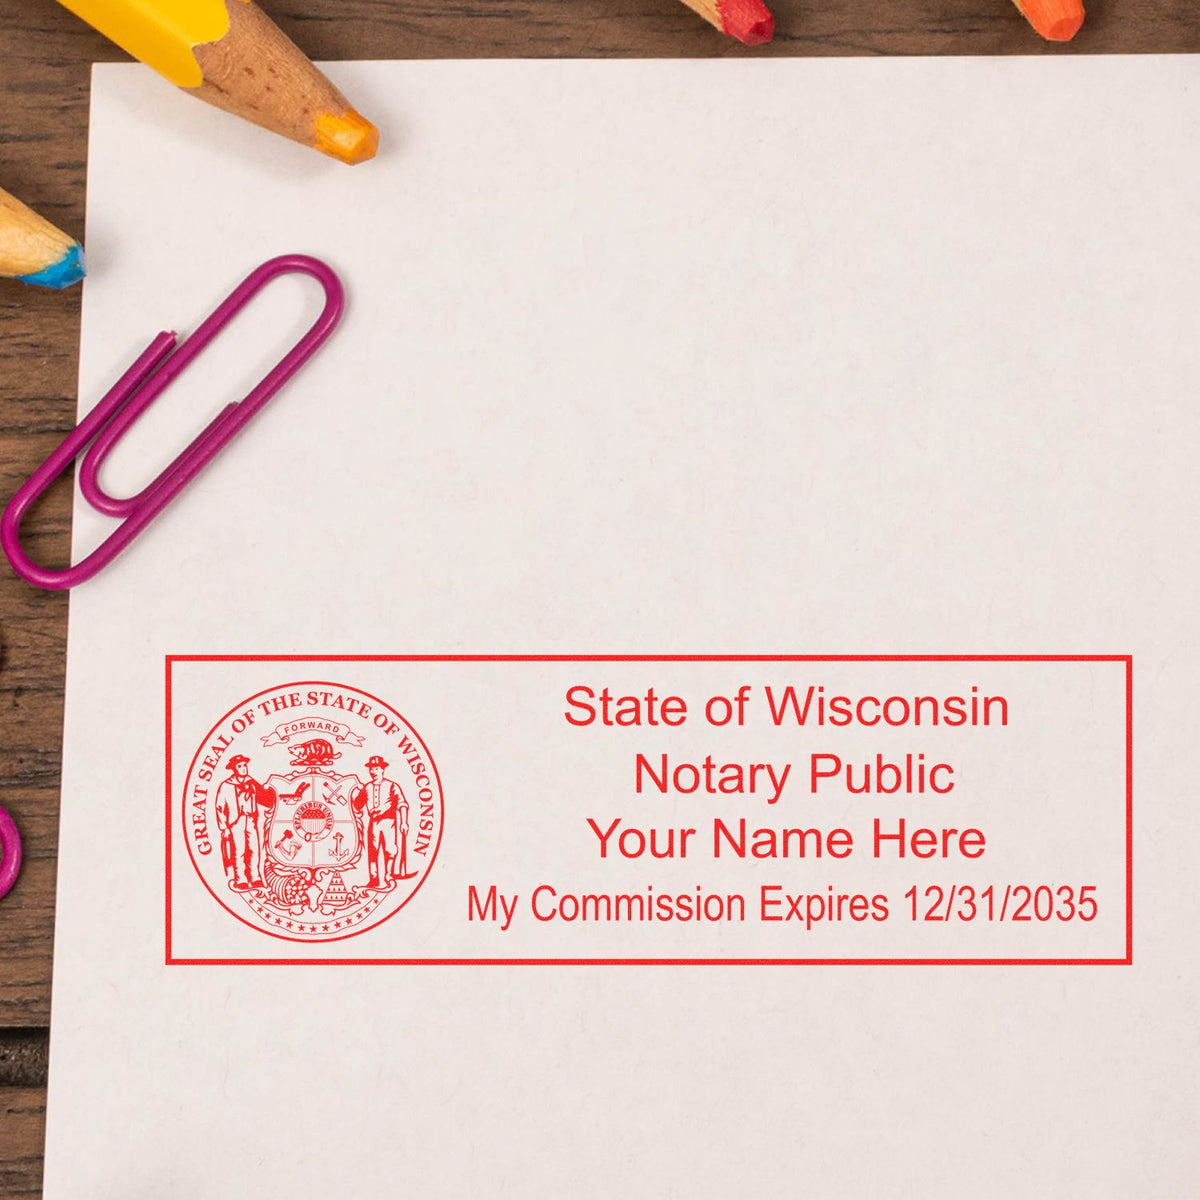 Another Example of a stamped impression of the Super Slim Wisconsin Notary Public Stamp on a piece of office paper.